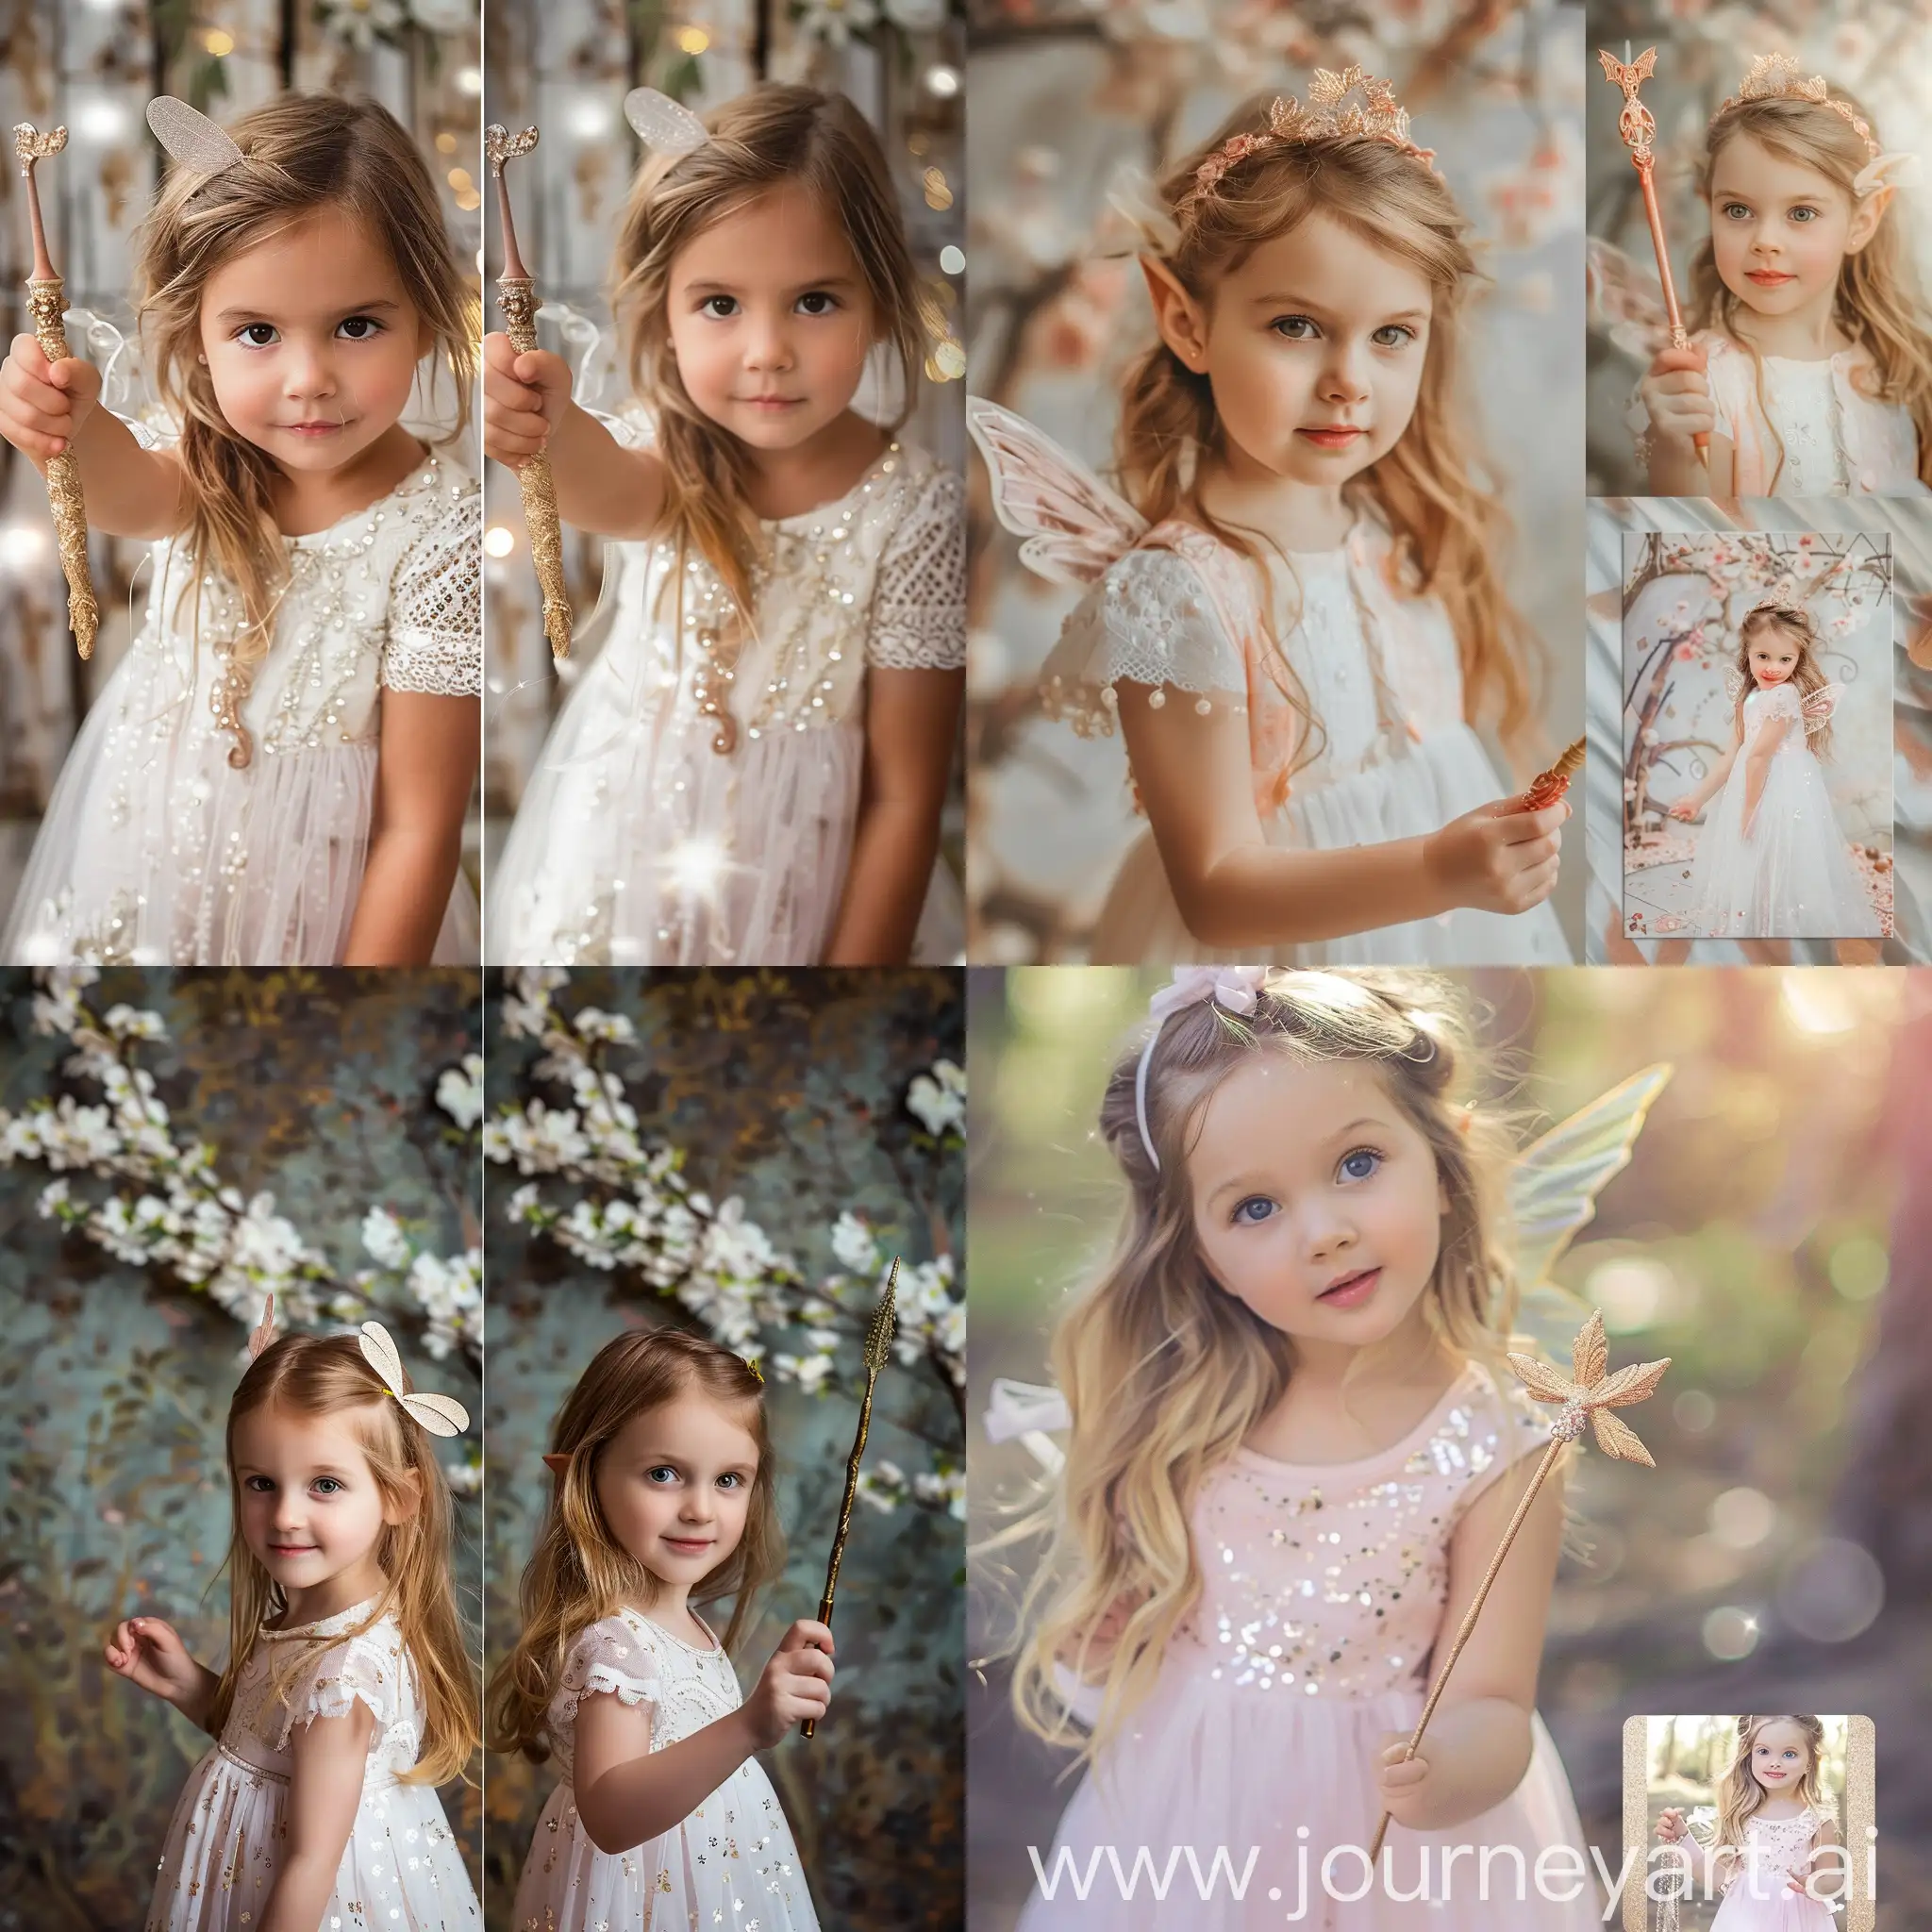 Adorable-Princess-Posing-with-Fairy-Wand-in-Hand-Front-and-Back-Photo